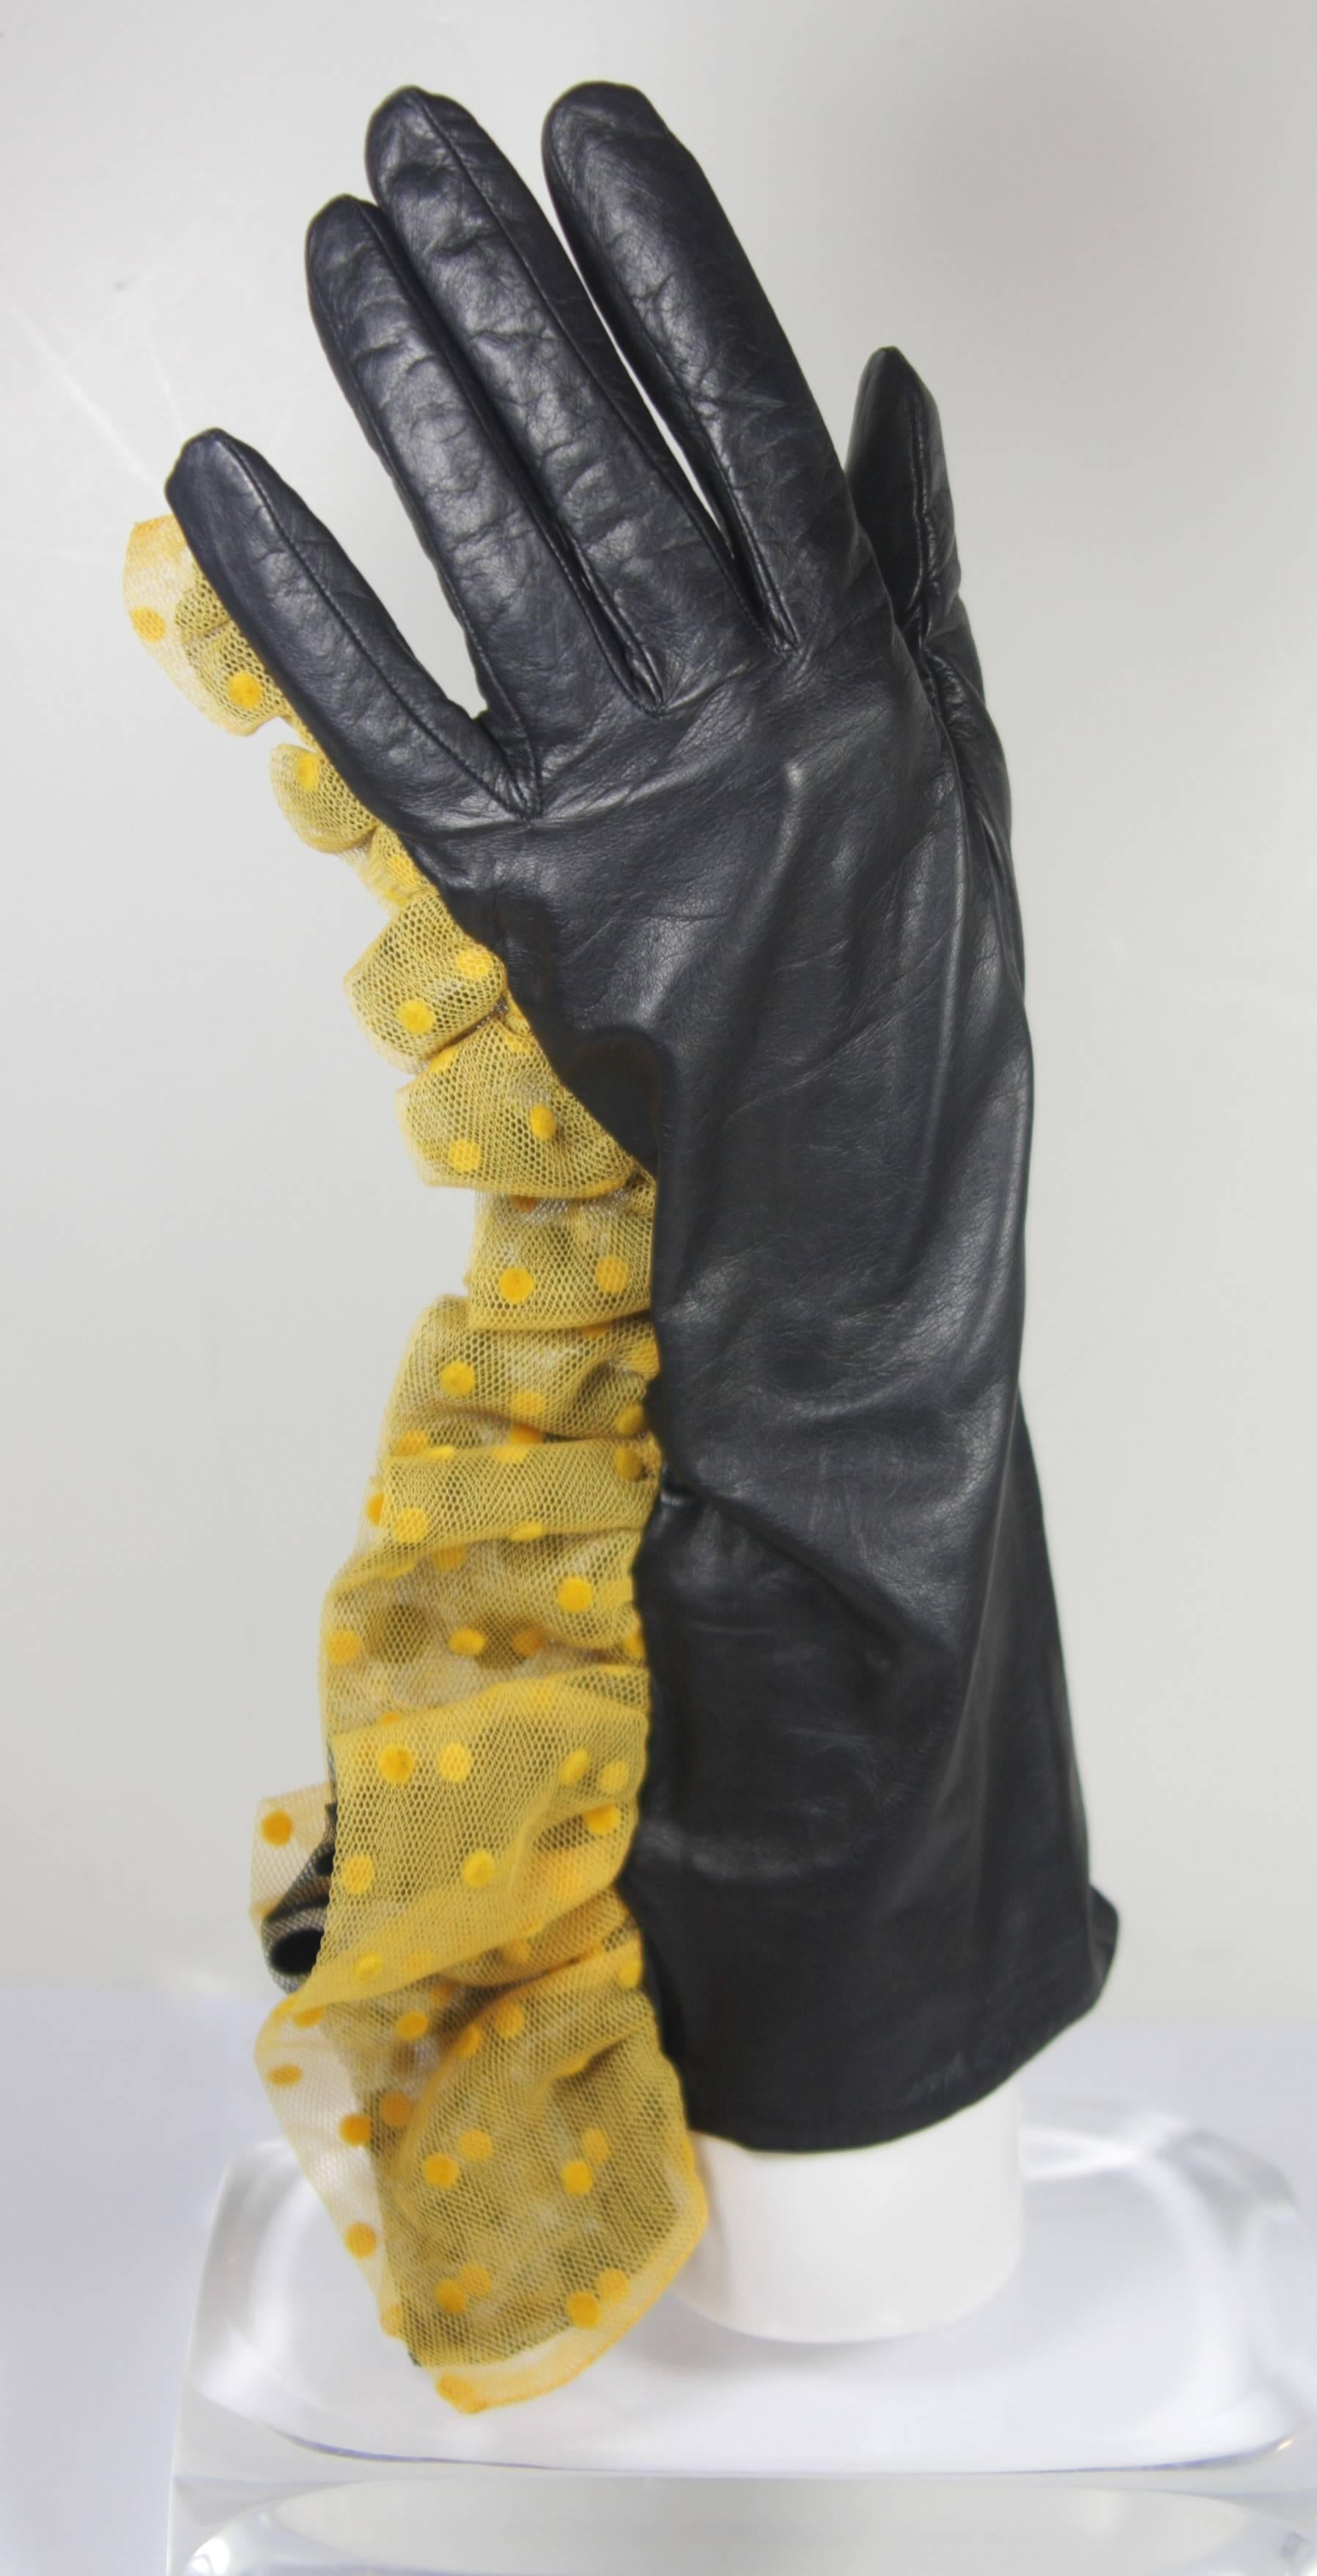 This vintage design is available for viewing at our Beverly Hills Boutique. We offer a large selection of evening gowns and luxury garments. 

 This gloves are composed of an ultra soft leather and feature a yellow with black polka dot mesh